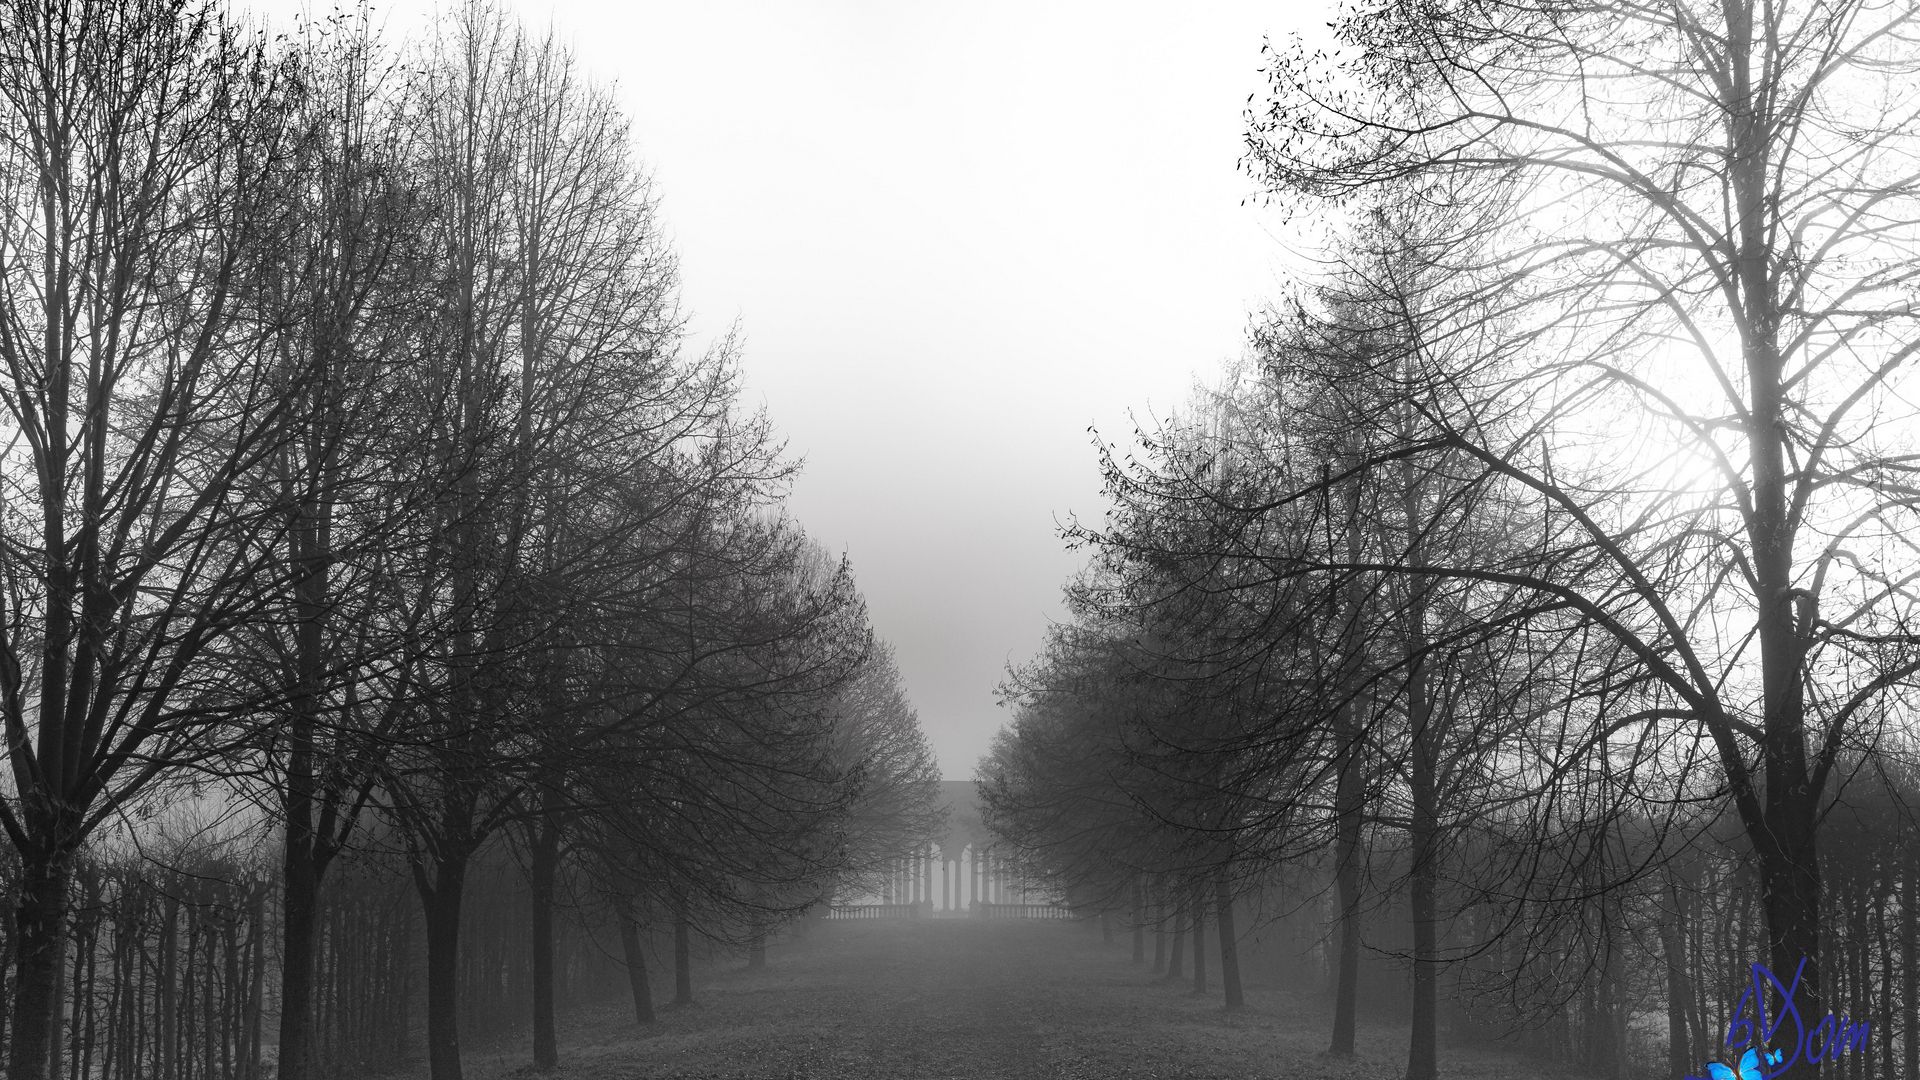 Download wallpaper 1920x1080 park, trees, path, black and white ...